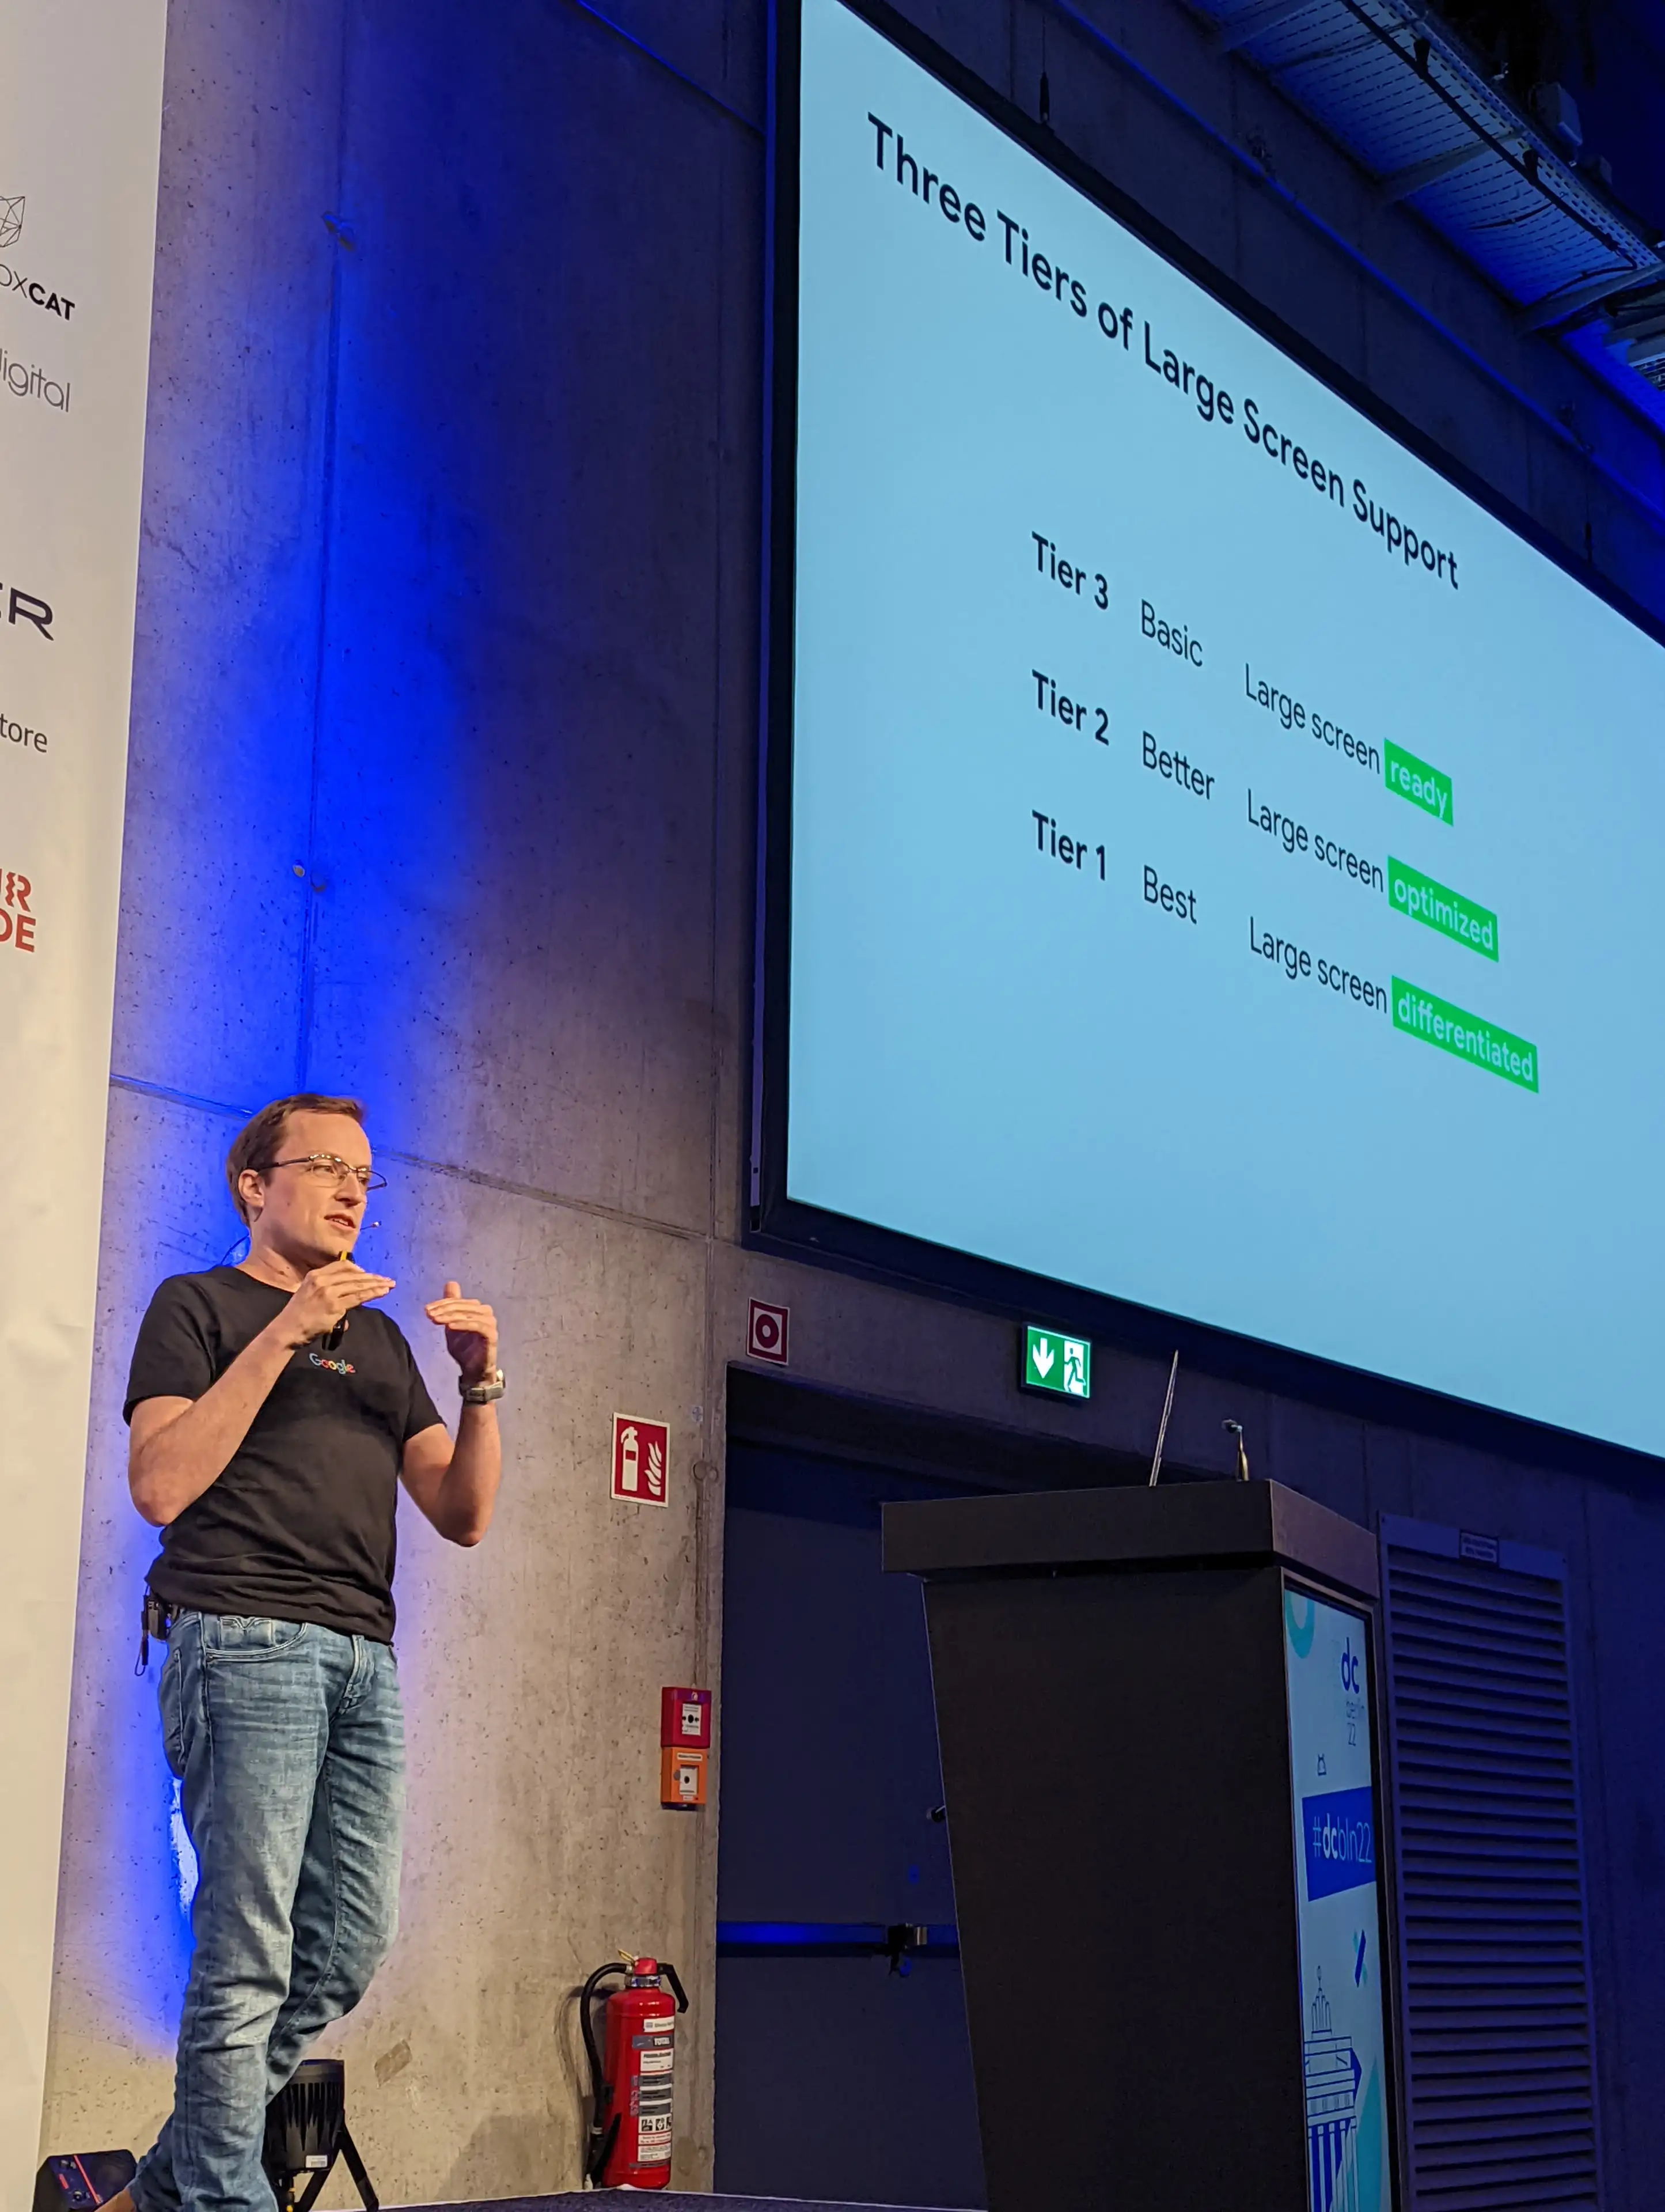 Paul Lammertsma shows us the art of building adaptive UIs for large screens